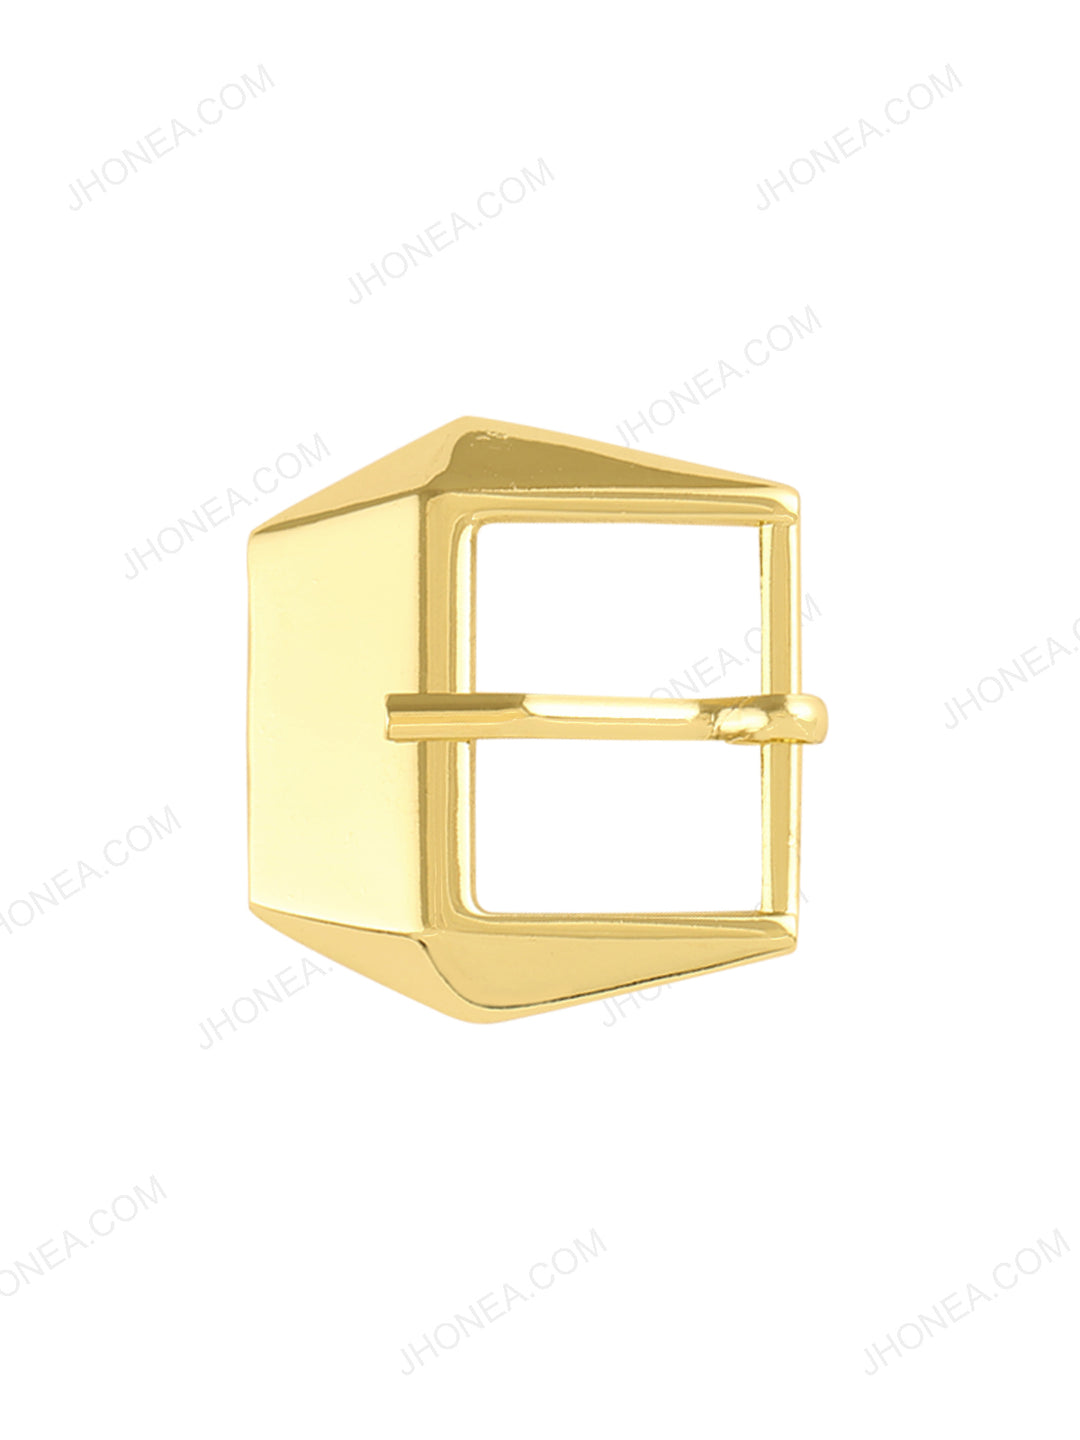 Shiny Bright Gold Western Style 3D Design Belt Buckle